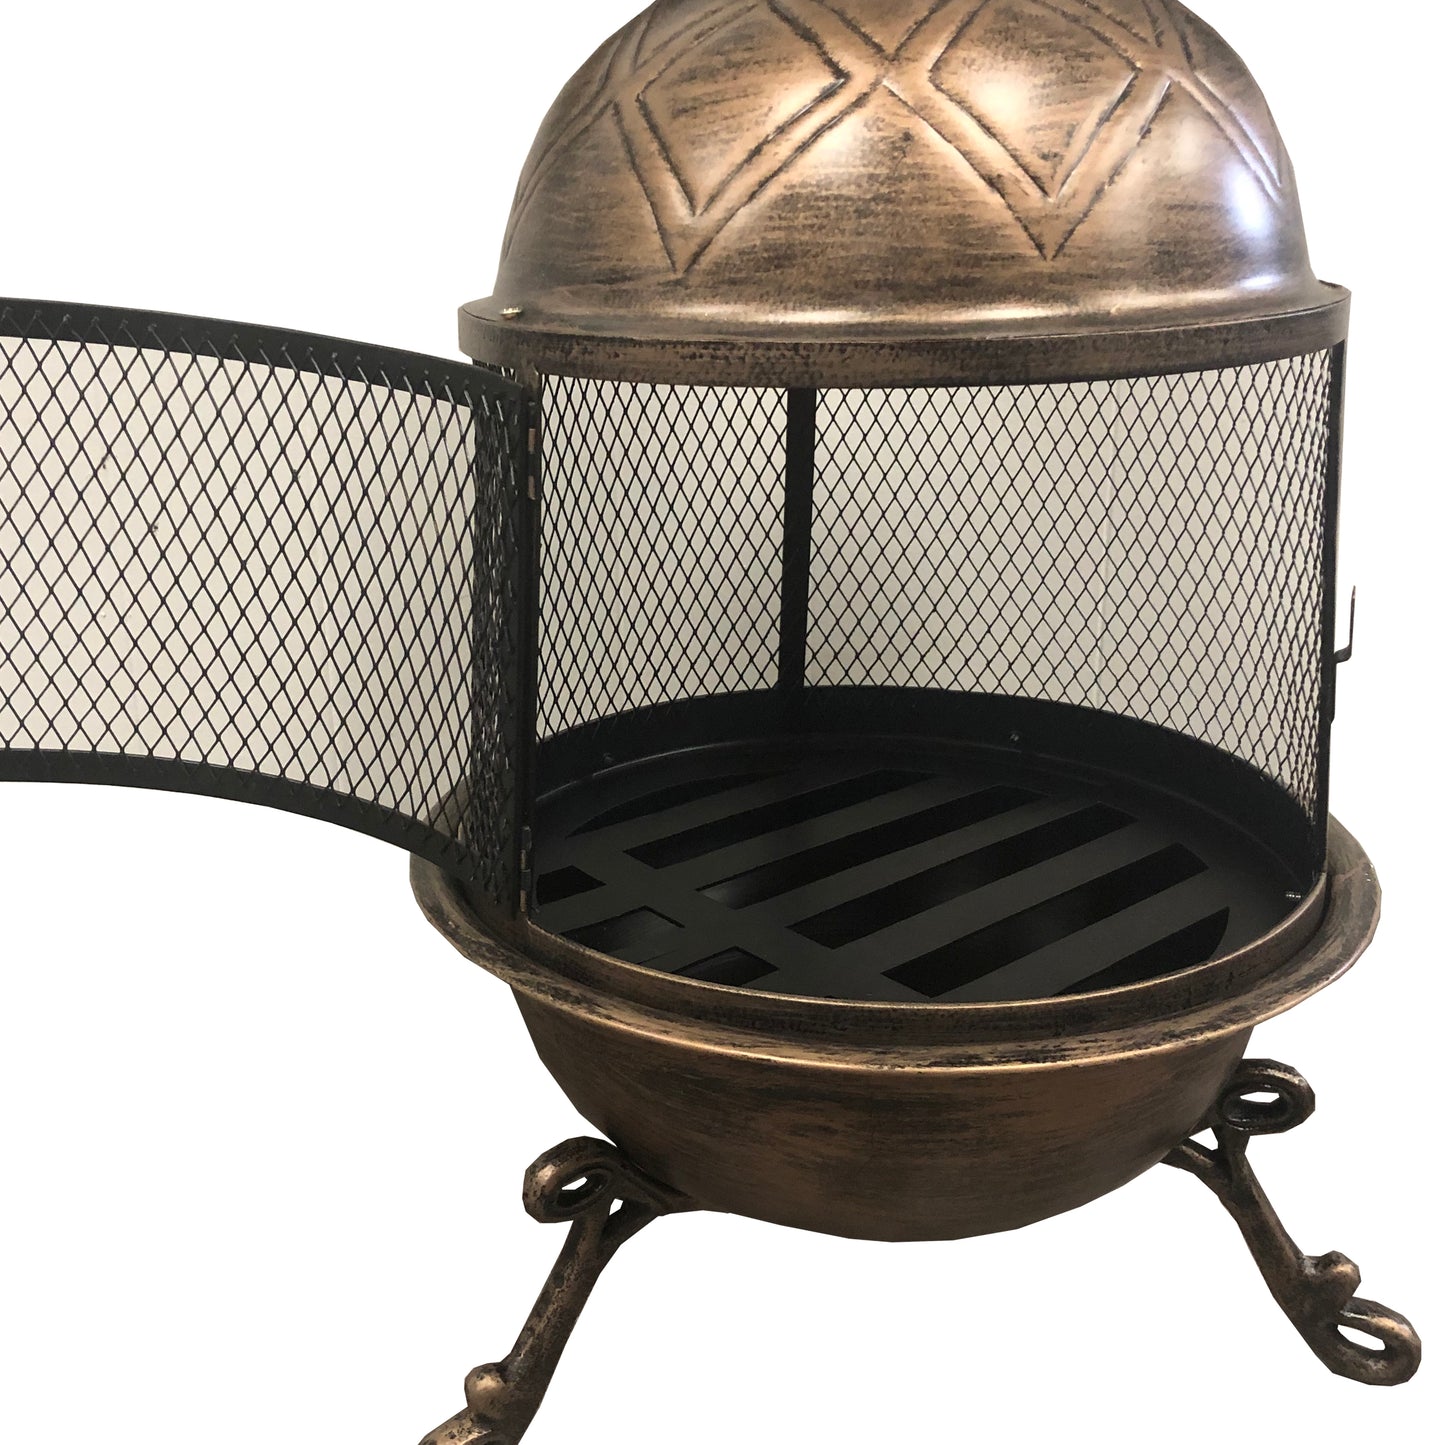 Solid Steel 36-in Tall Antique Bronze Chiminea Fire Pit